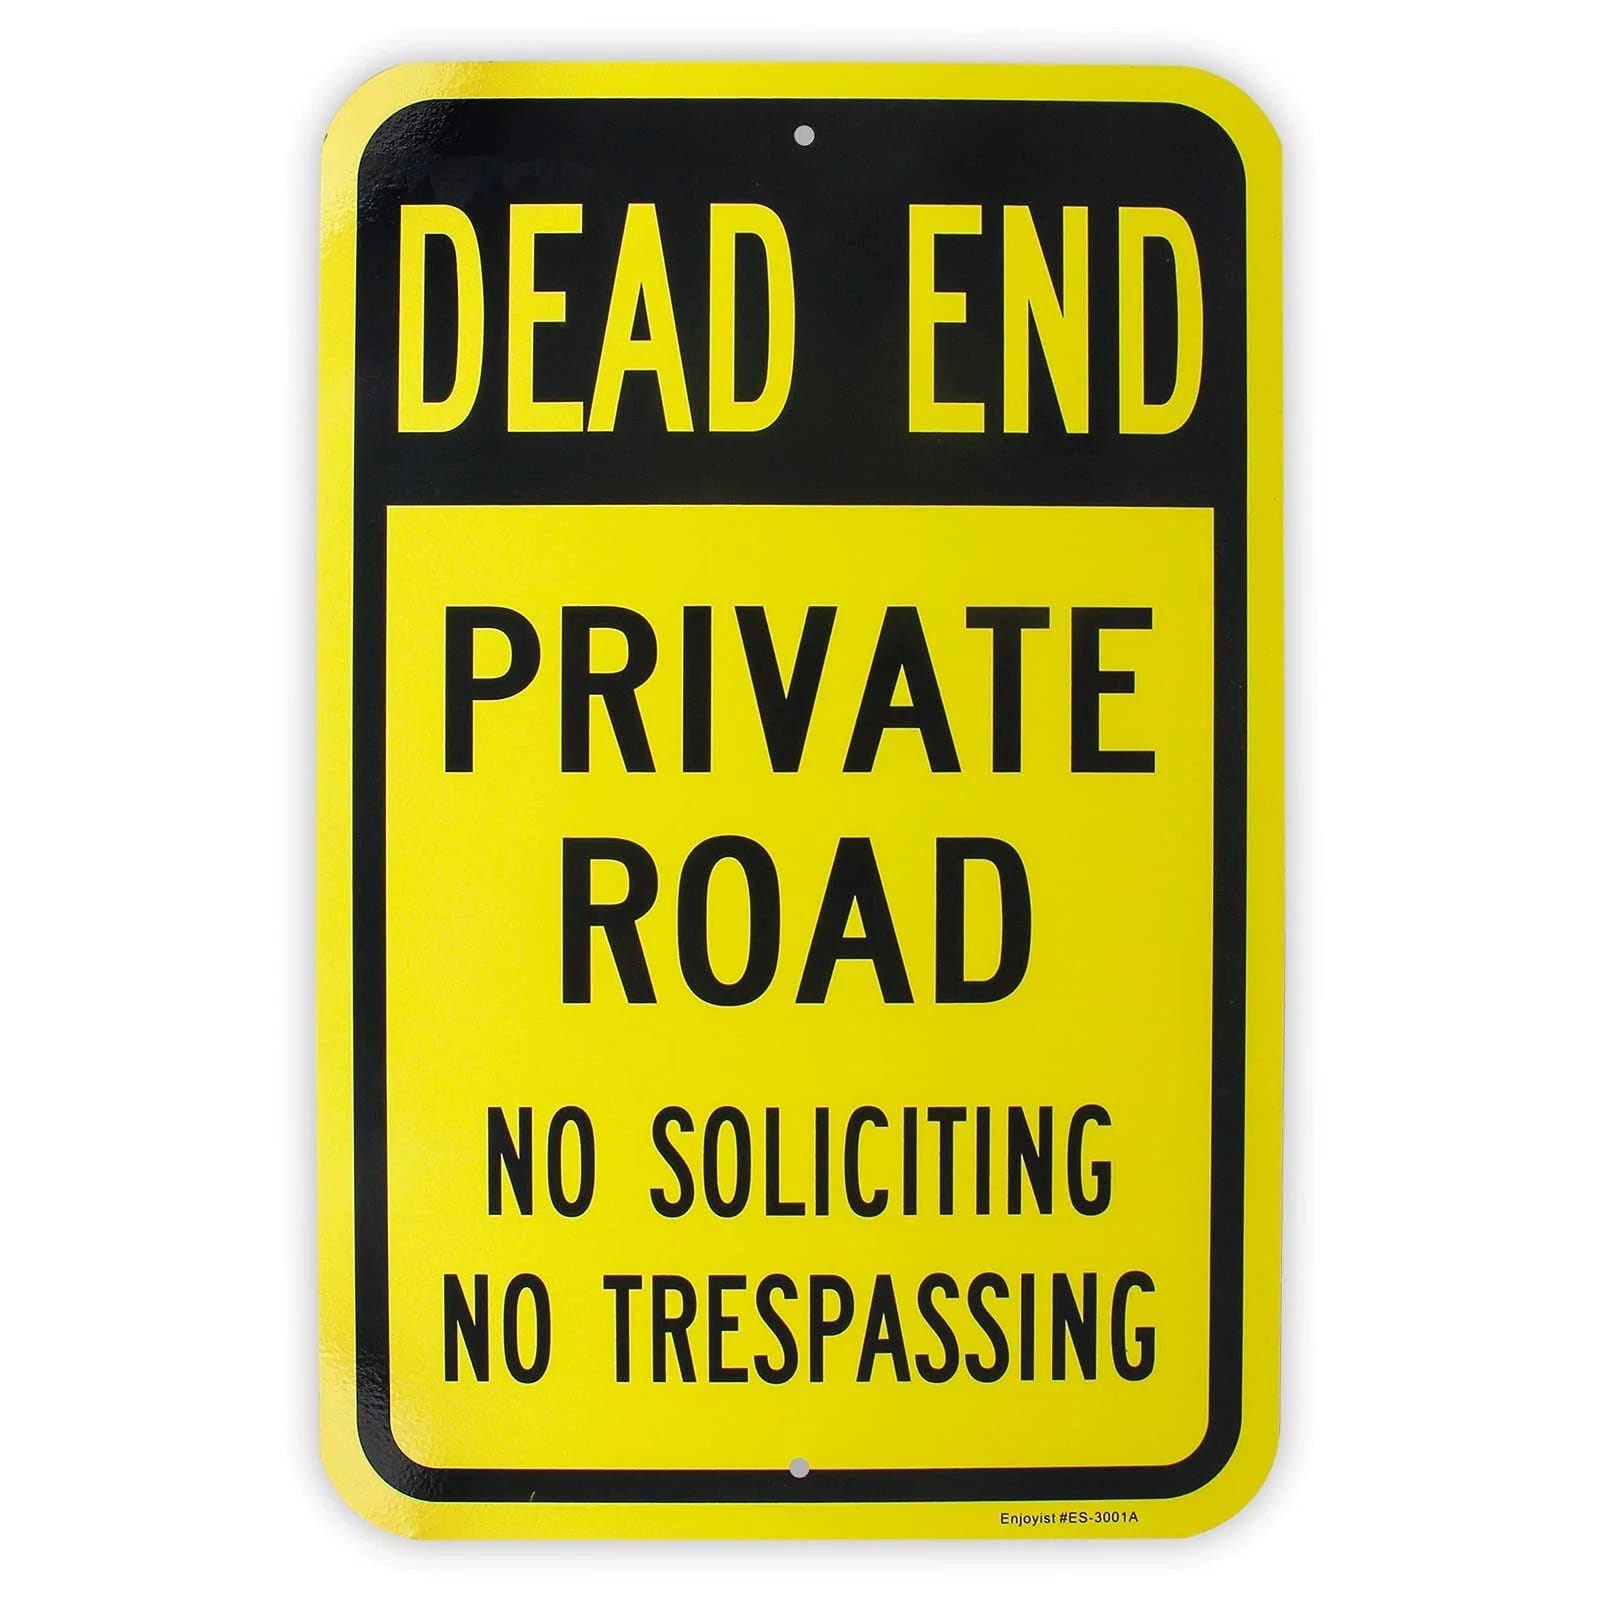 Dead End & No Soliciting/Trespassing Sign for Private Roads (2 Pre-drilled Holes, UV-Protected, Aluminum Construction) | Image